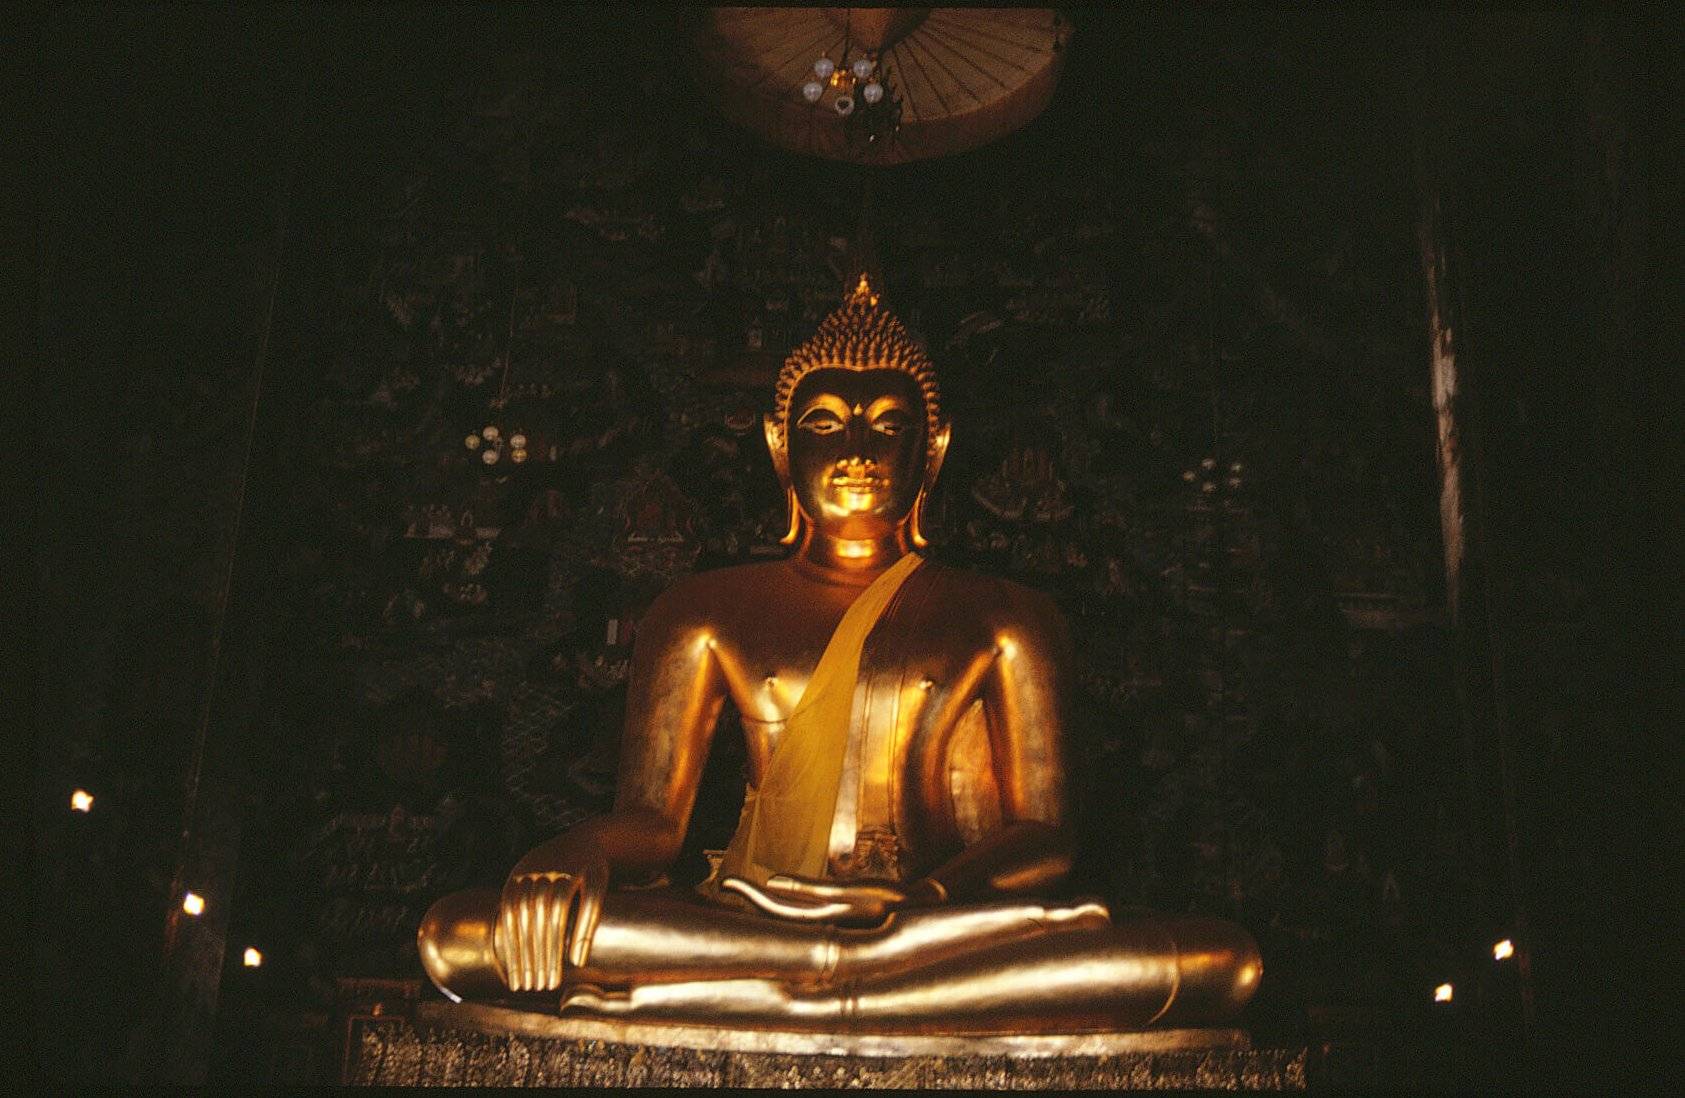 Interior statue in a Buddhist temple: a gilded figure seated cross-legged.